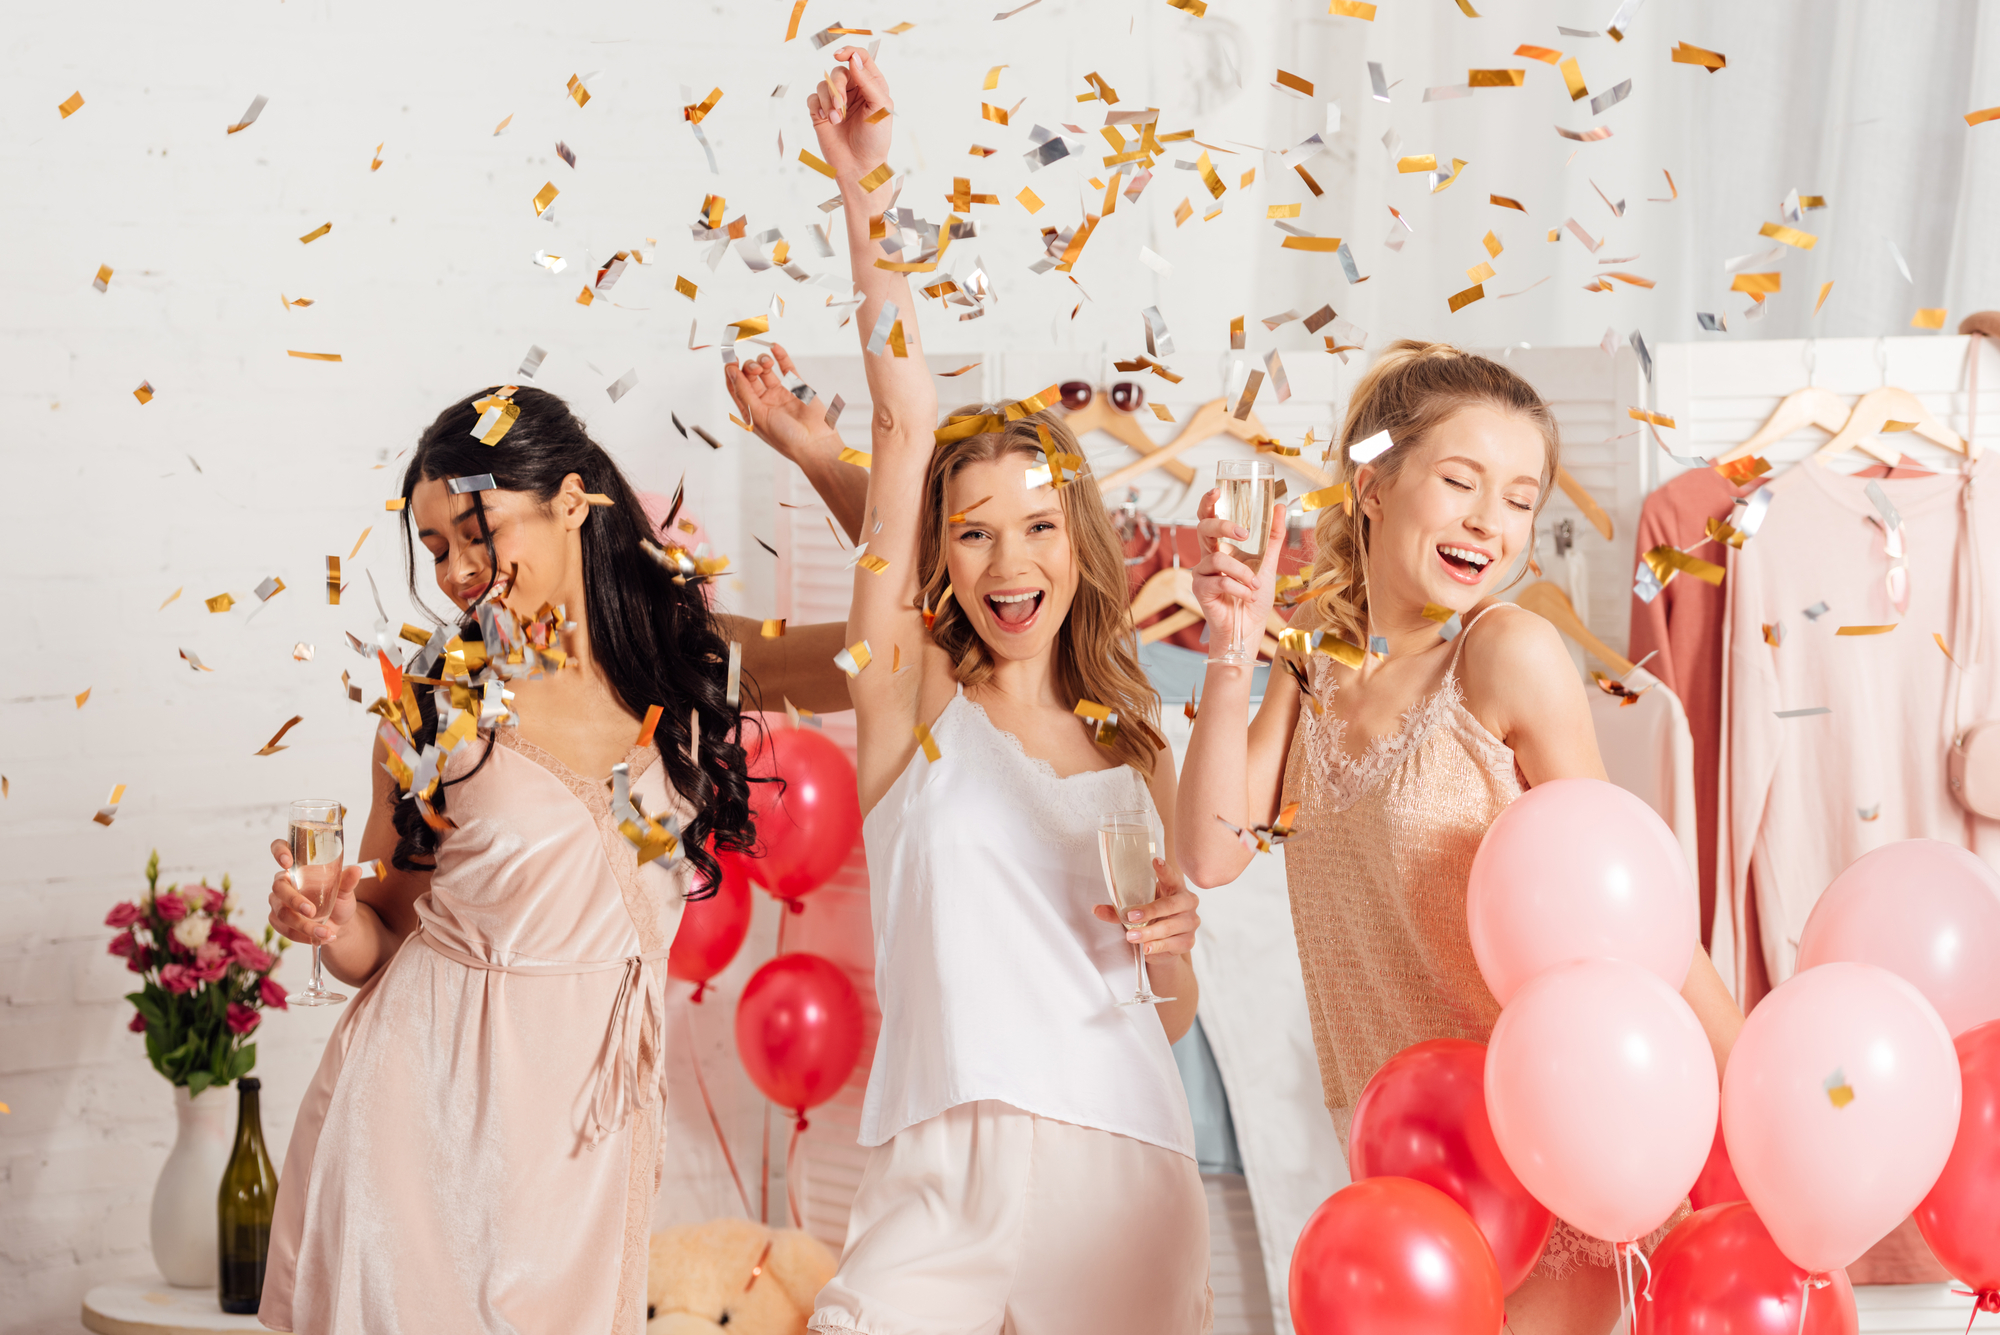 A group of women celebrating a bachelorette party with special balloons and confetti.